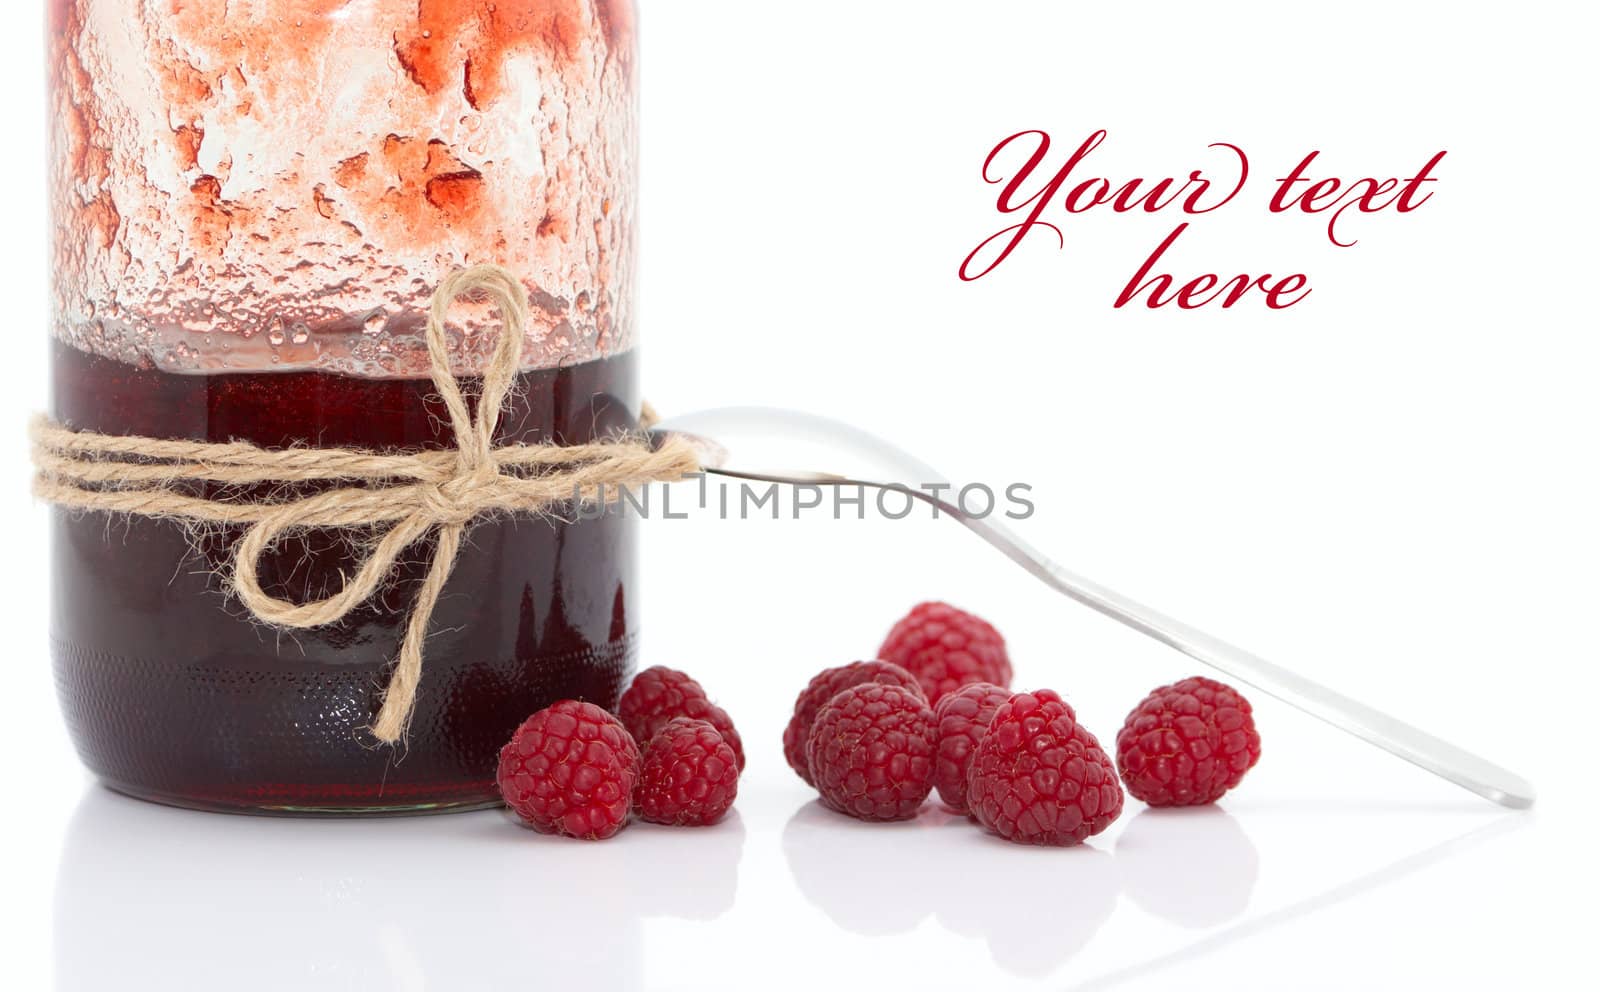 Delicious jam made from fresh berries (easy removable text)